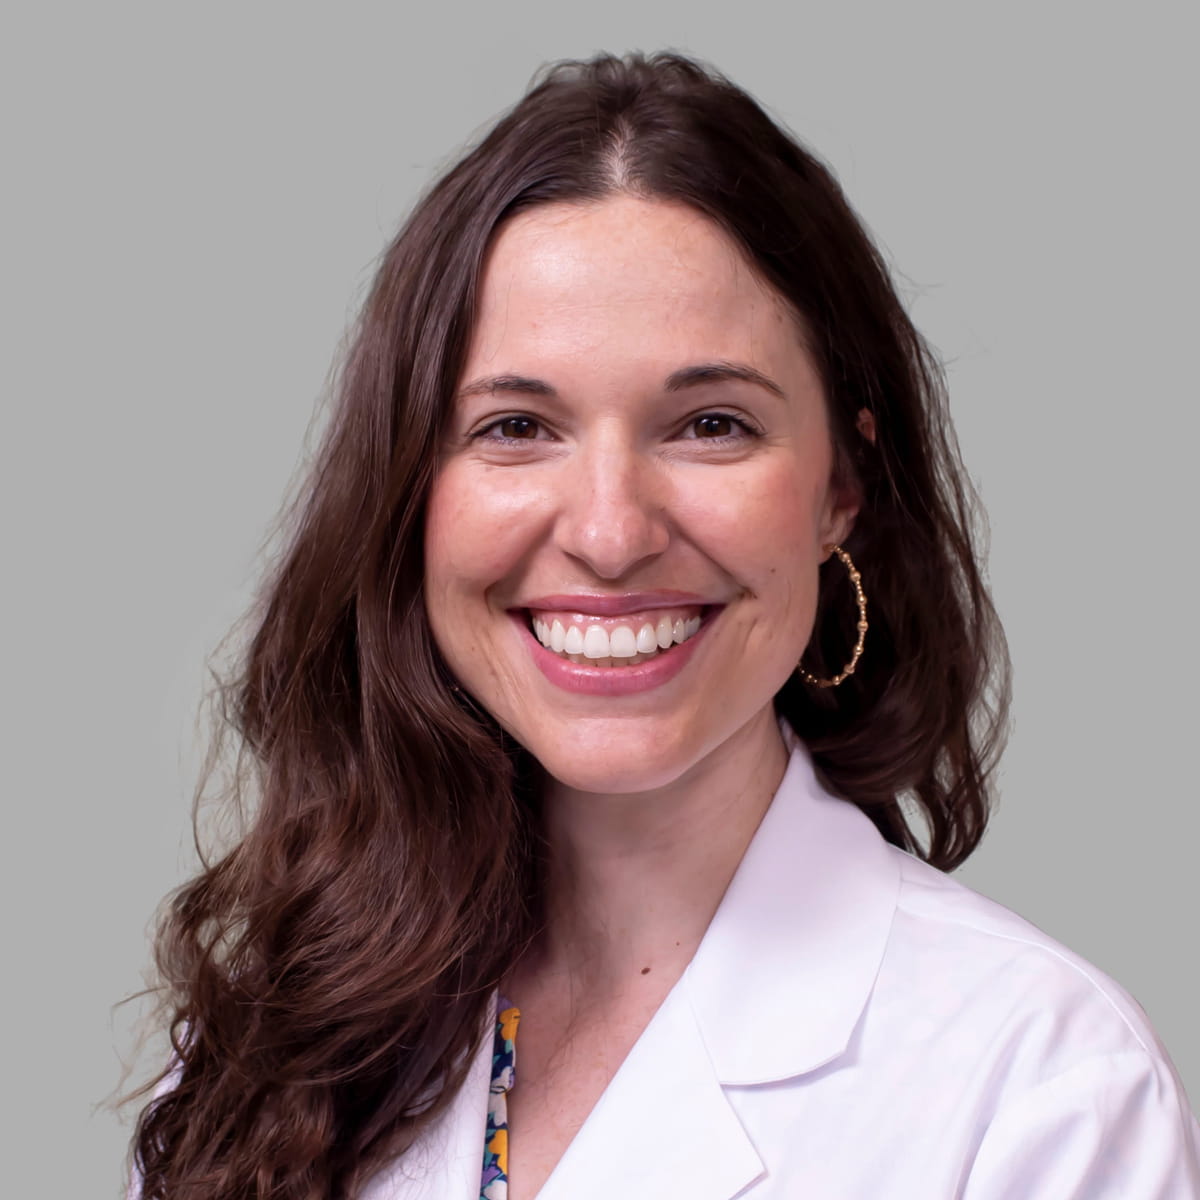 A friendly image of Nicole Shields, MD